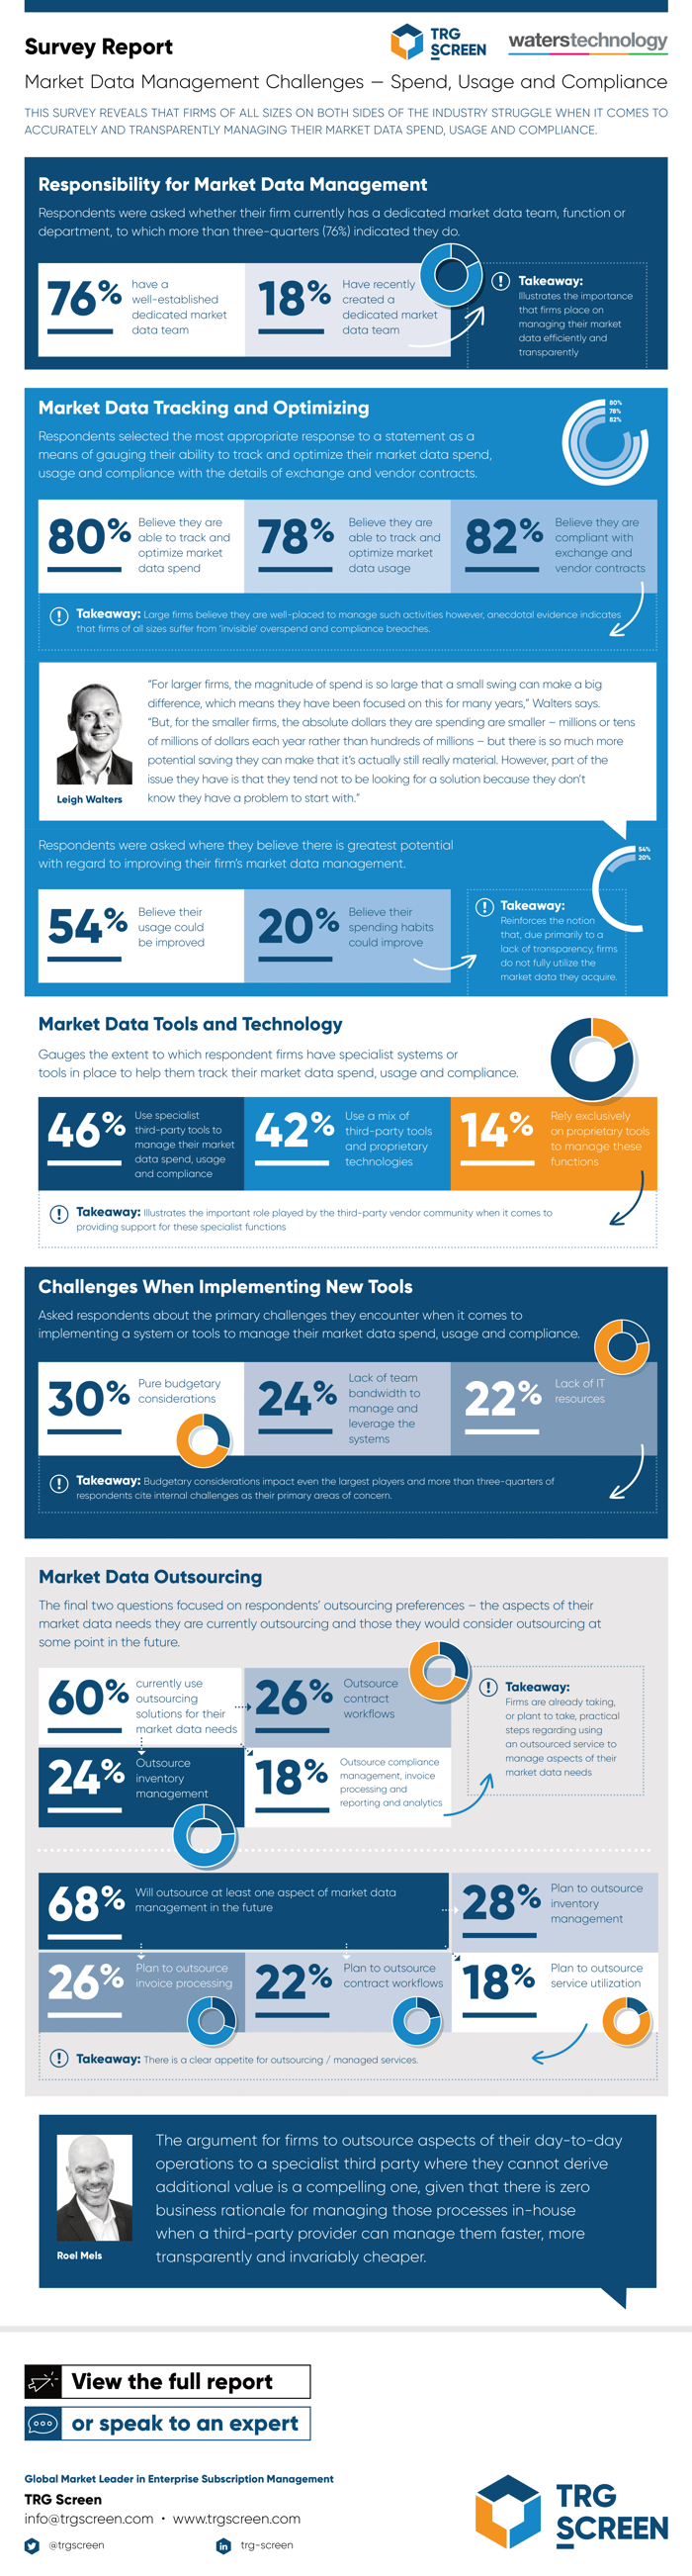 waterstechnology-trg-screen-survey-report-market-data-management-challenges-infographic